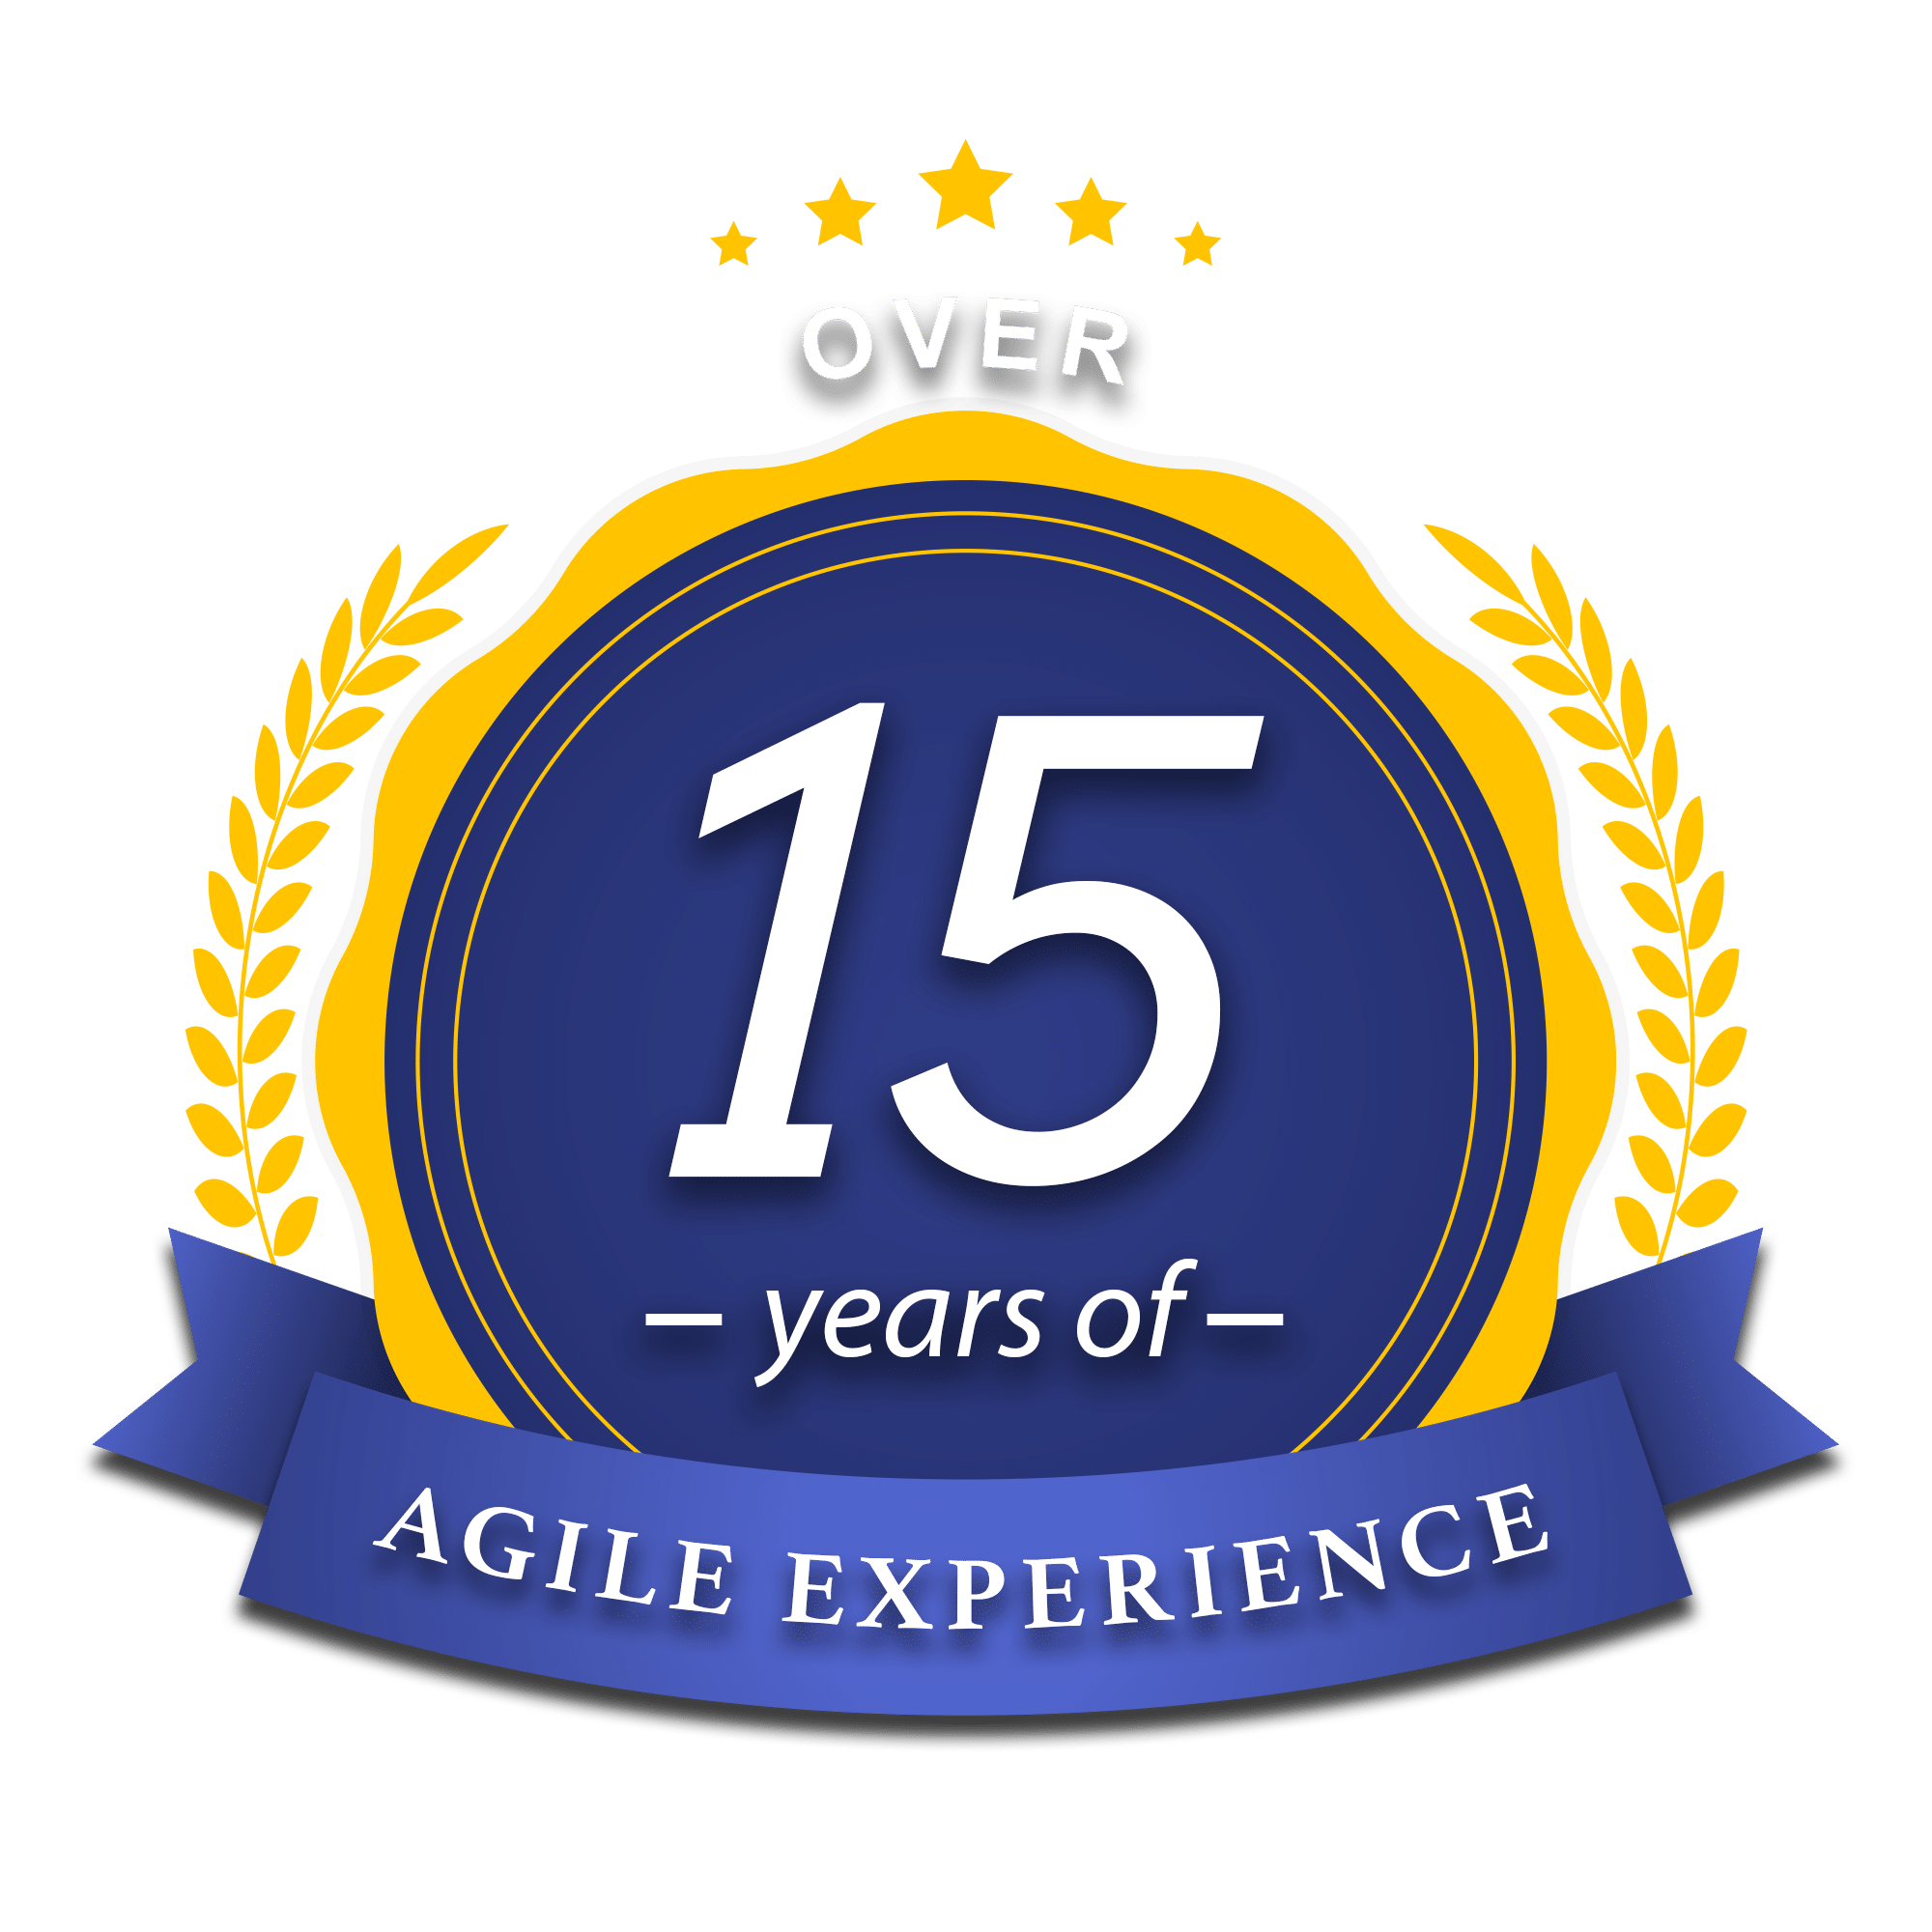 15 Years of Agile Experience Badge